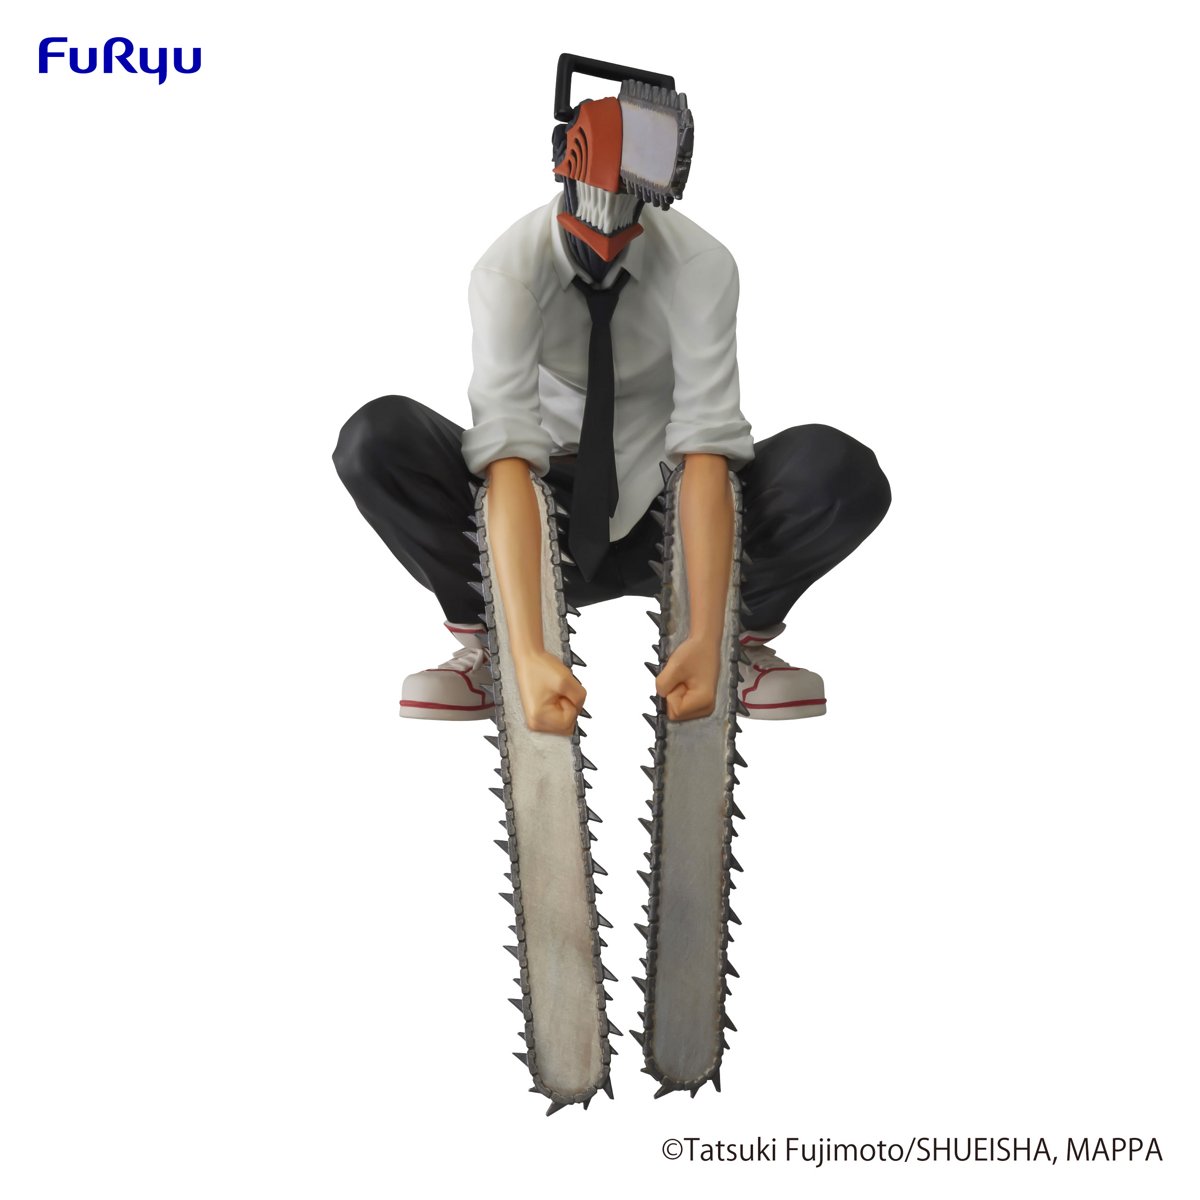 Chainsaw Man - Noodle Stopper Figure (FuRyu), Franchise: Chainsaw Man, Brand: FuRyu, Release Date: 26. Dec 2022, Type: Prize, Nippon Figures